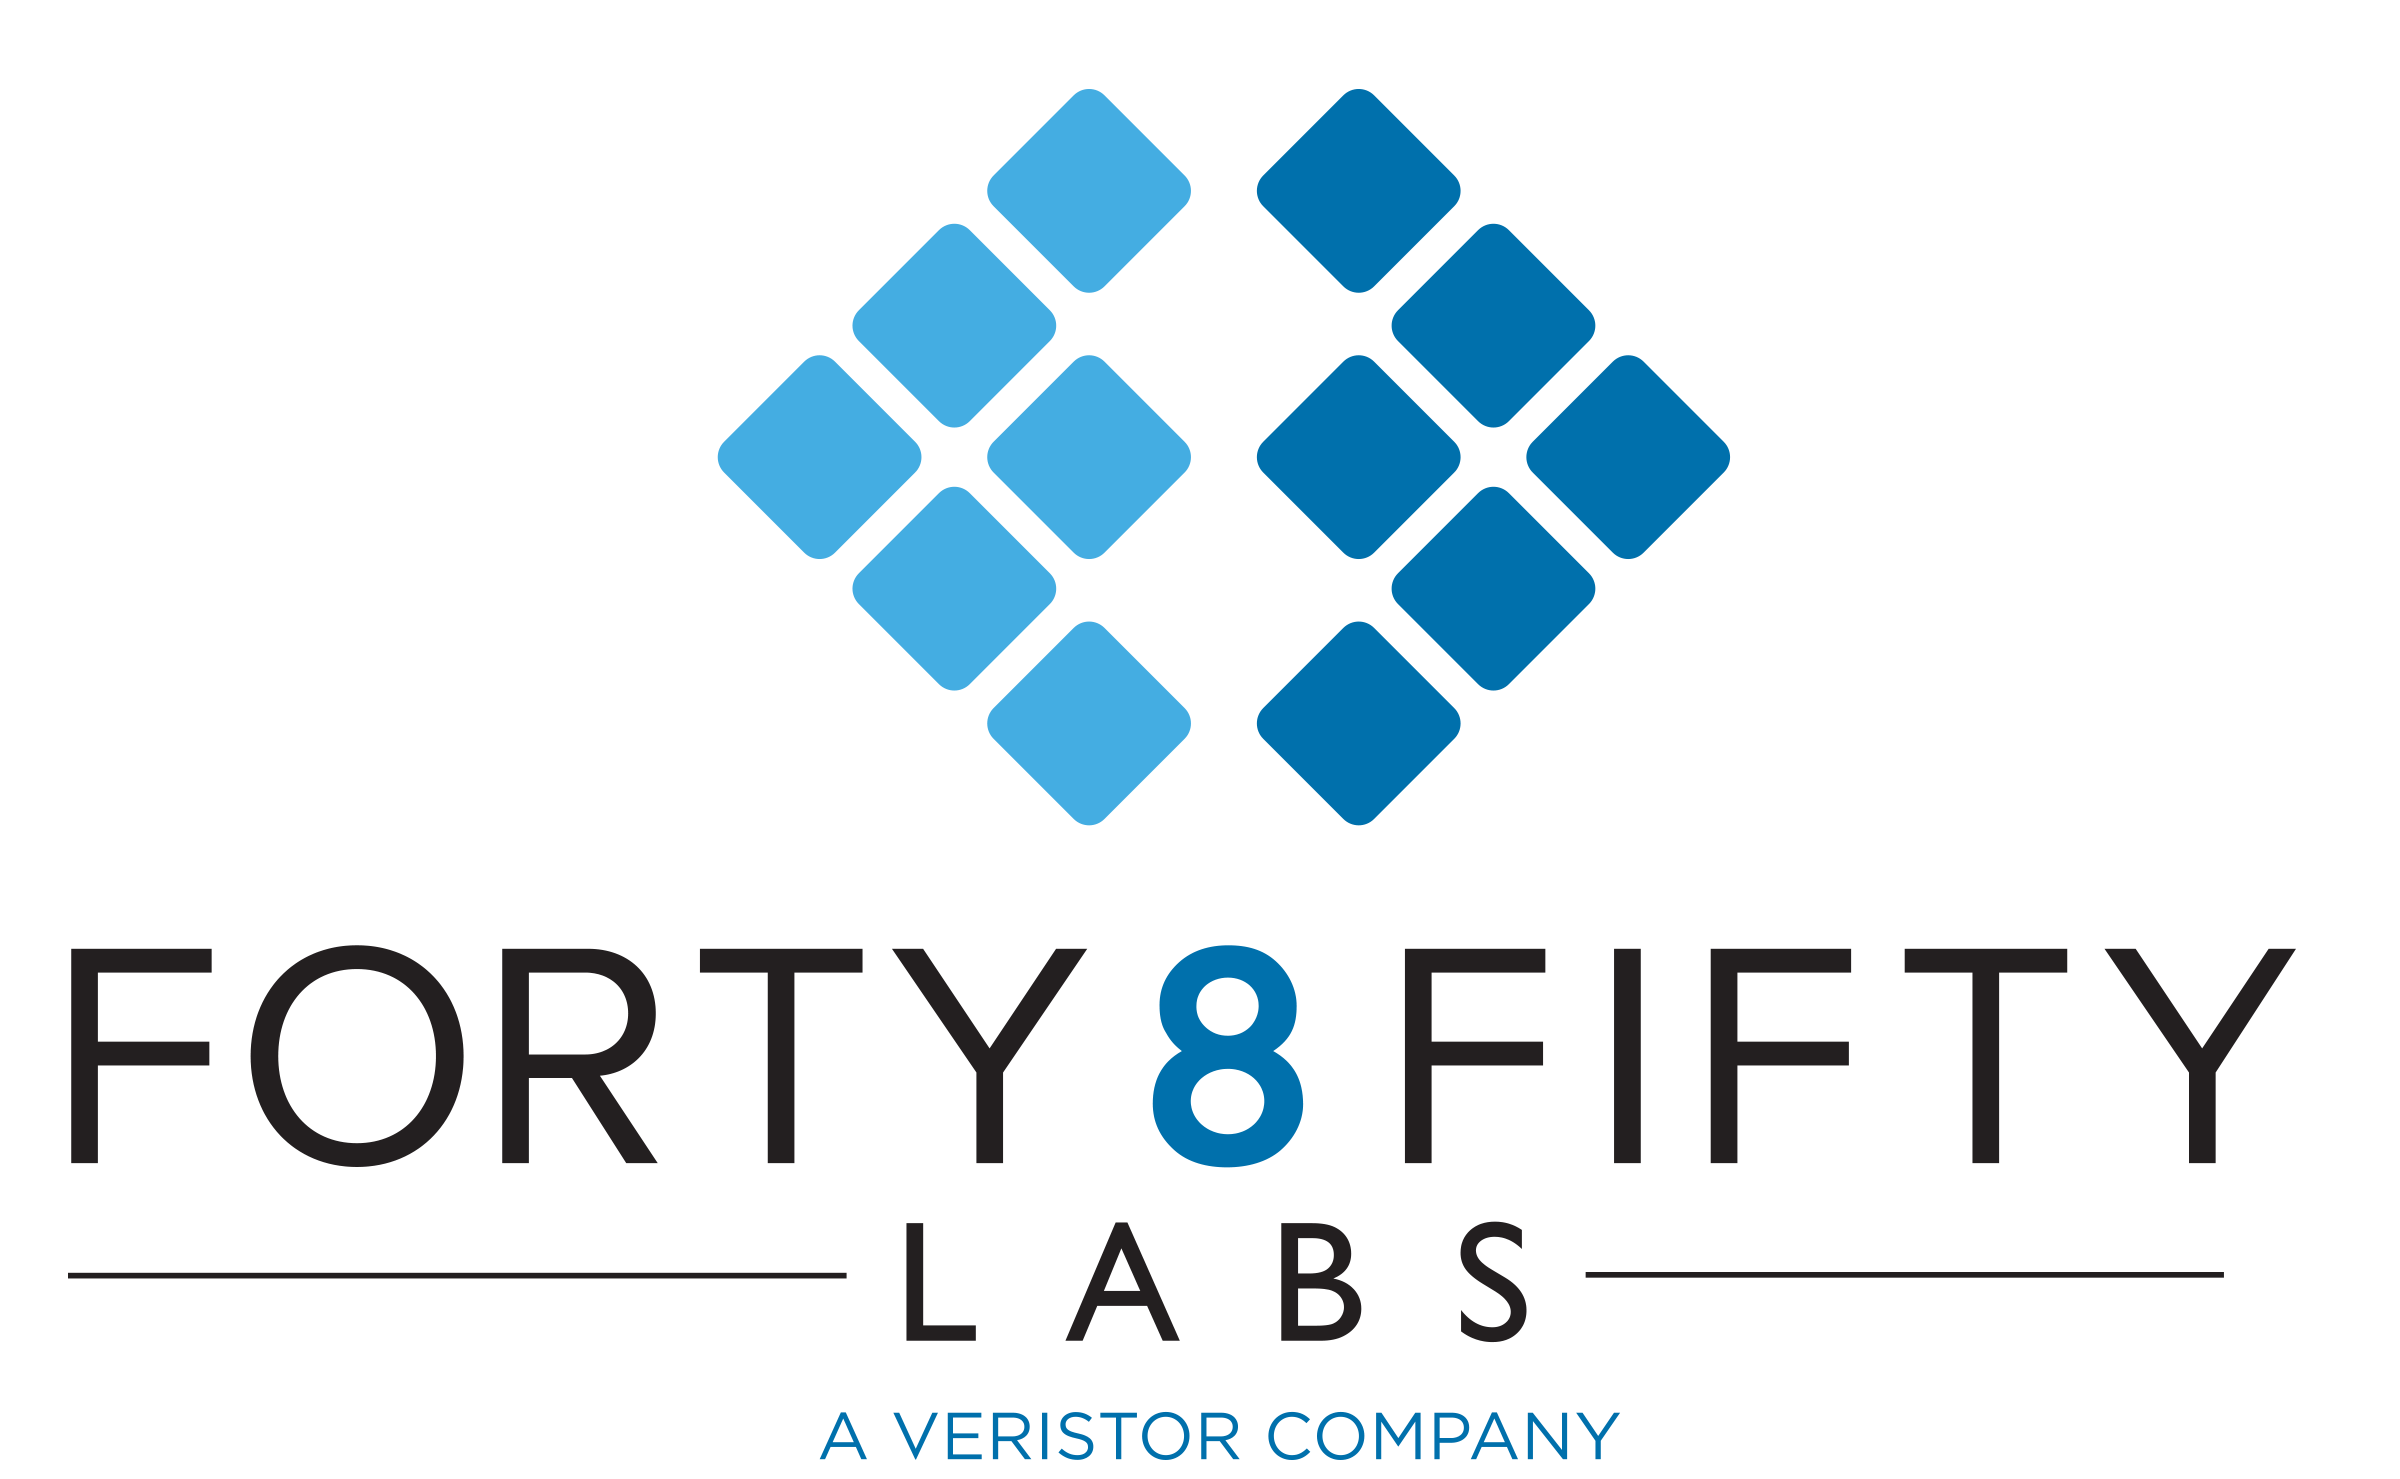 forty 8 fifty labs logo